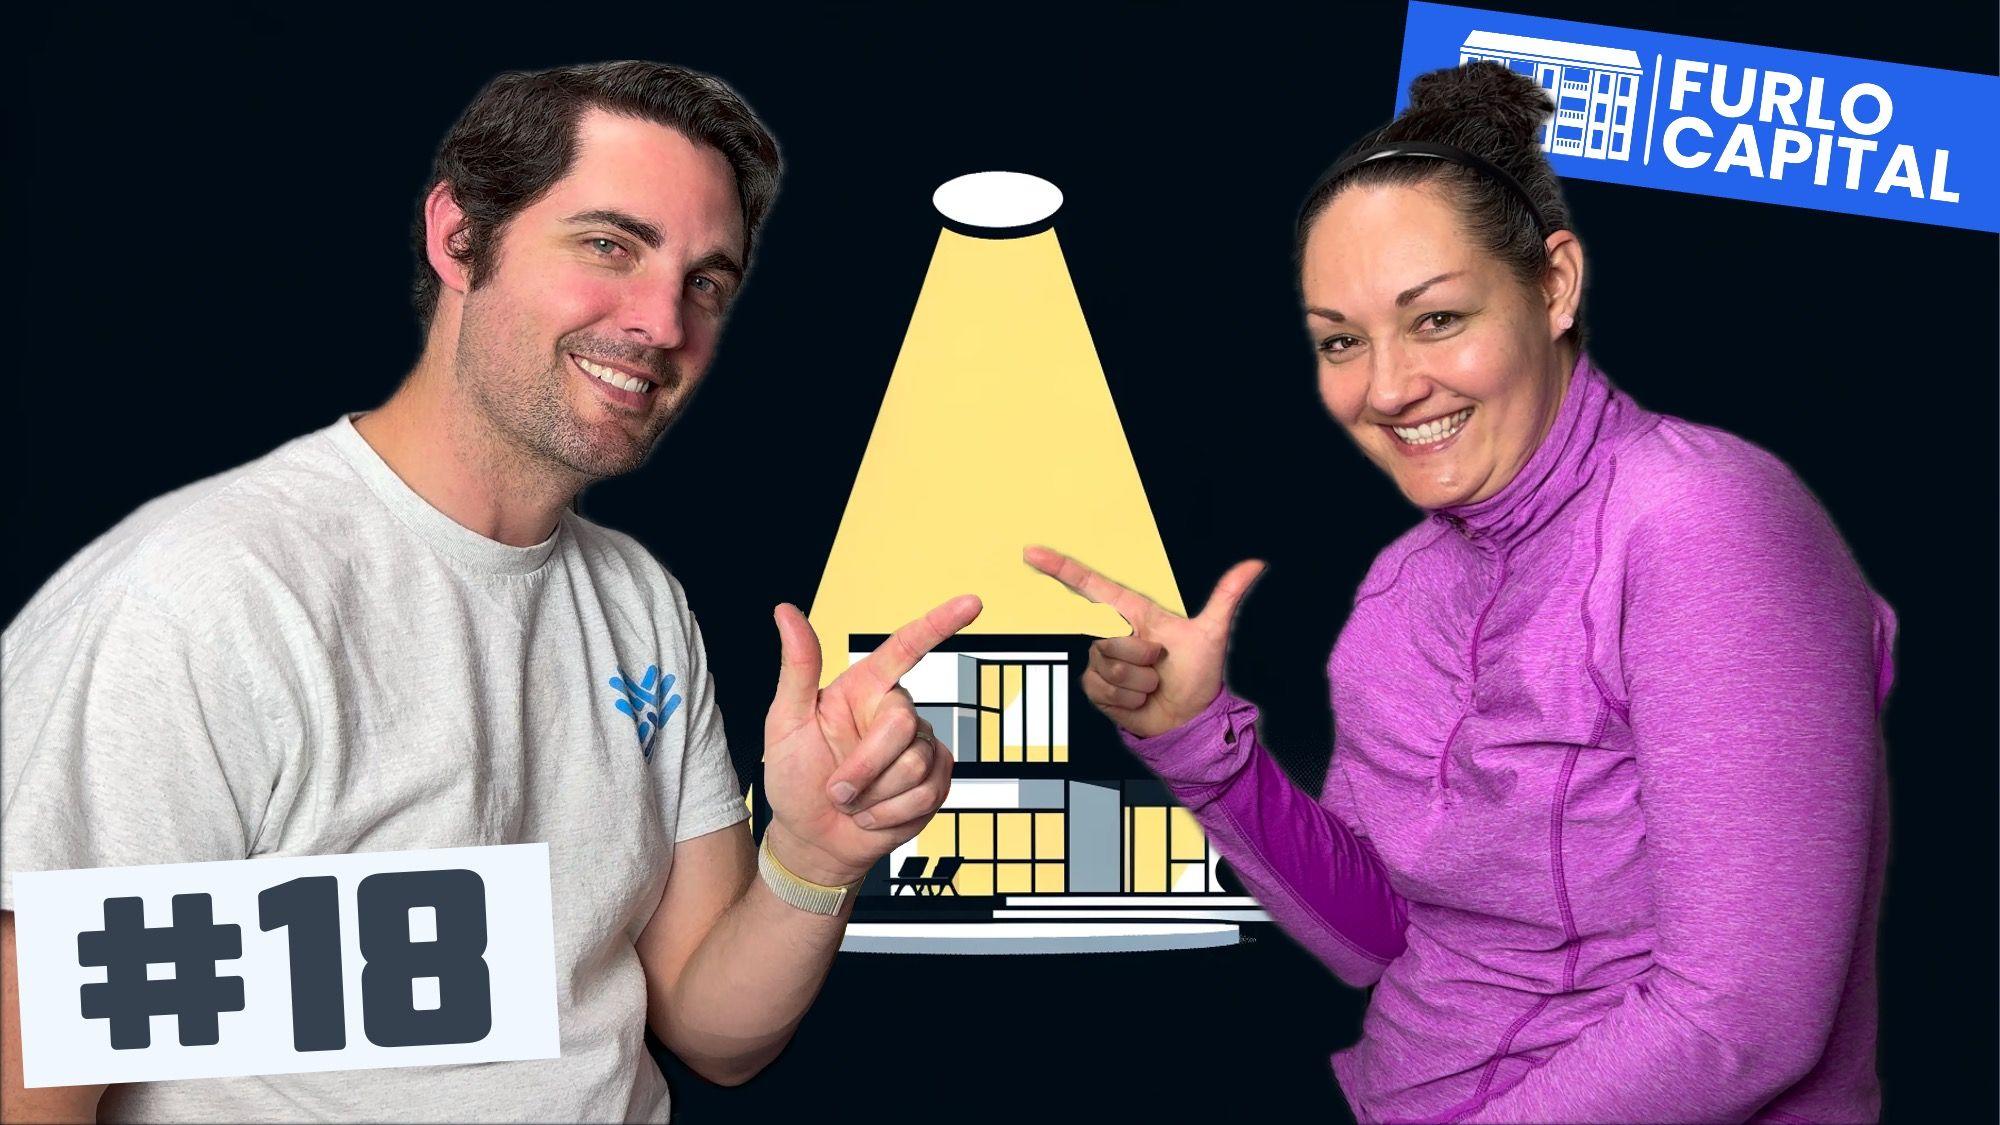 James and Jessi showing a peace sign with a spotlight over a duplex in the background